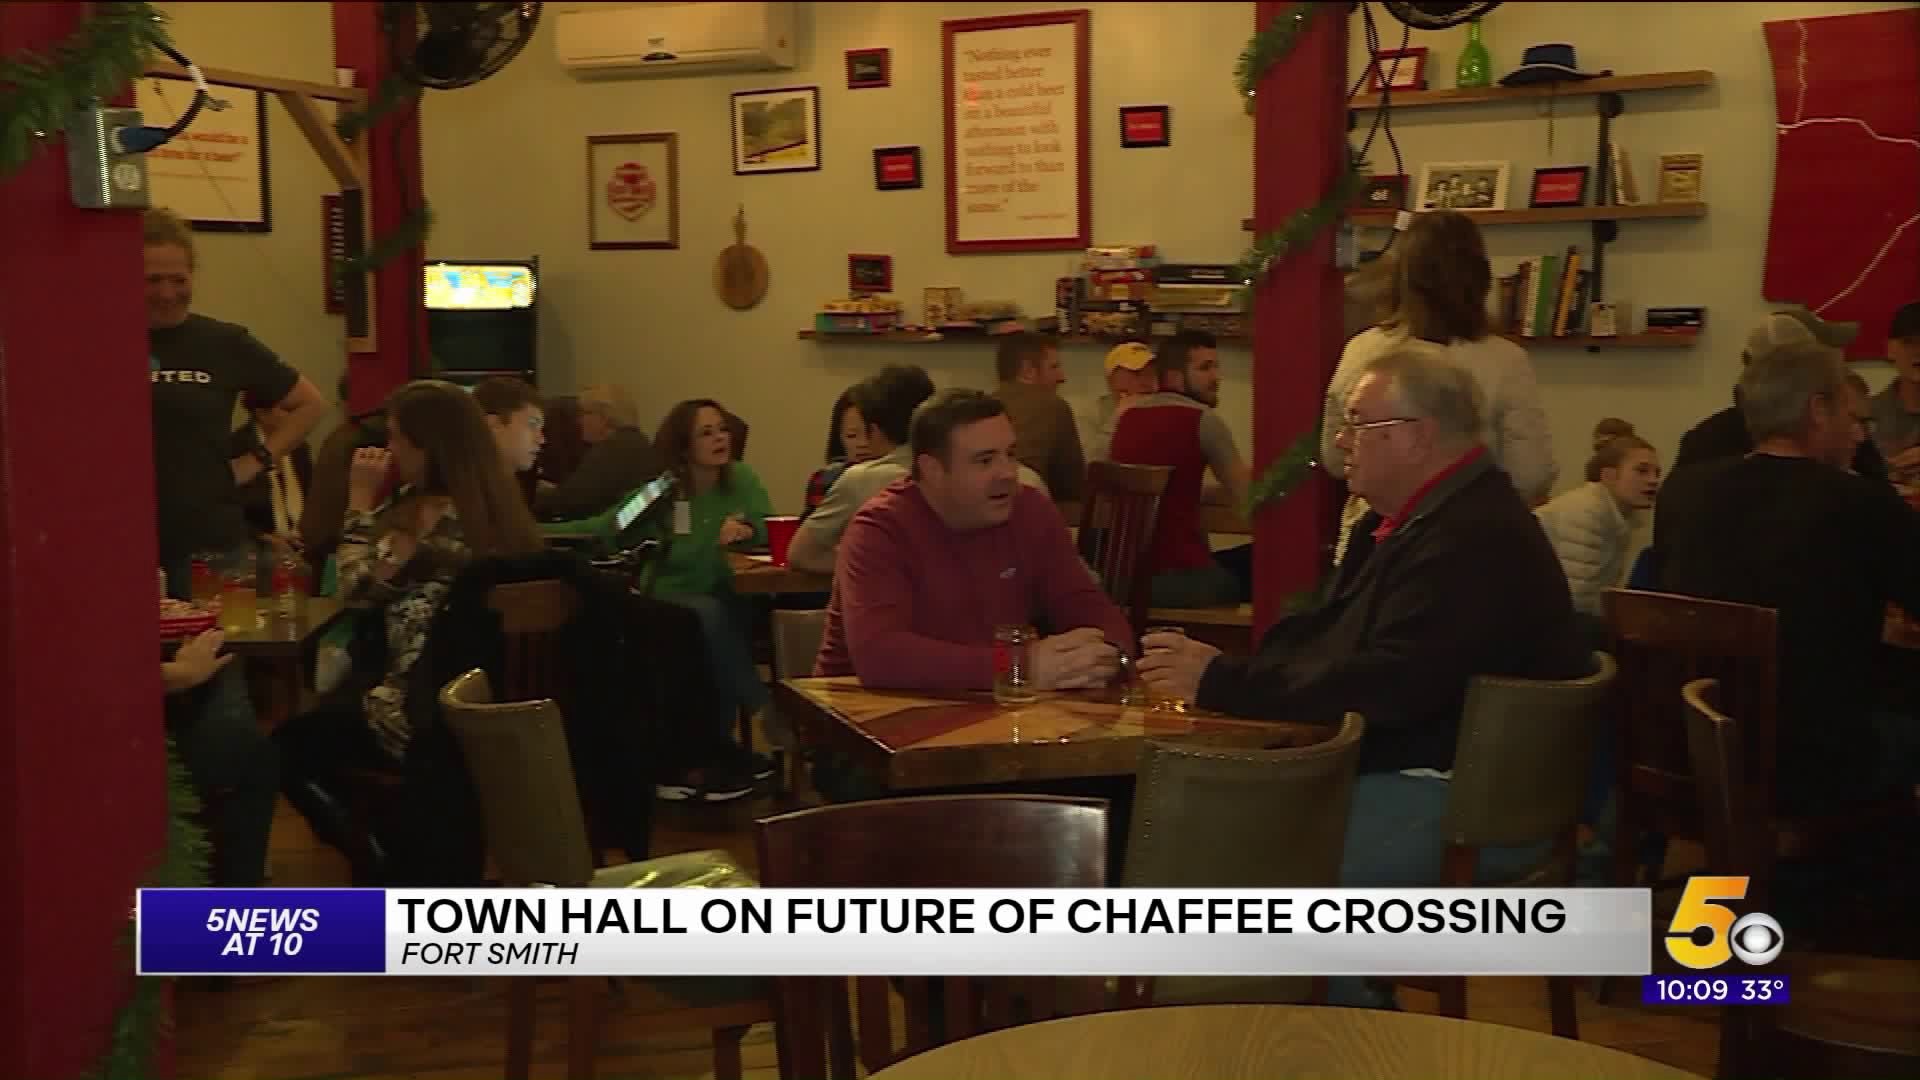 Town Hall Meeting Held About The Future Of Chaffee Crossing